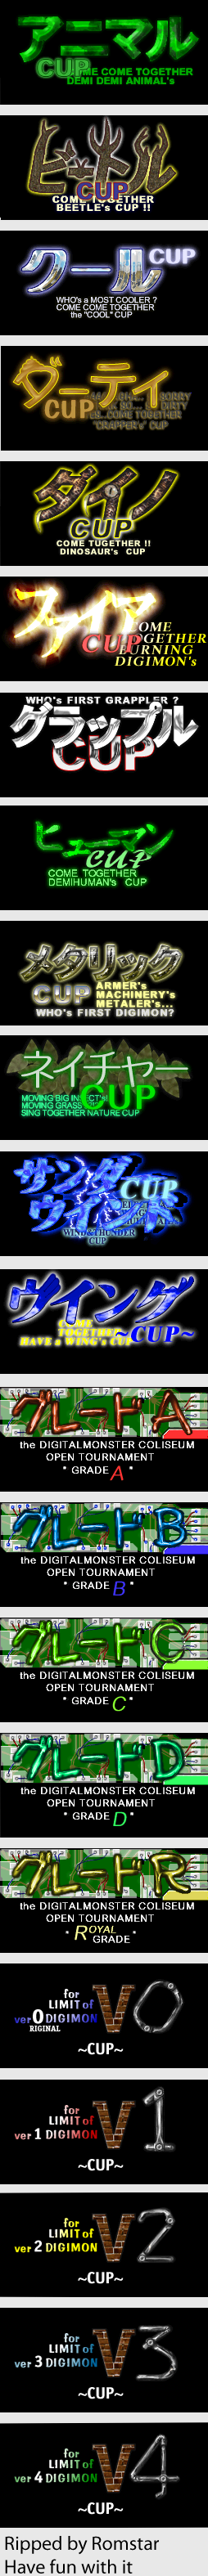 Digimon World - Arena Cups